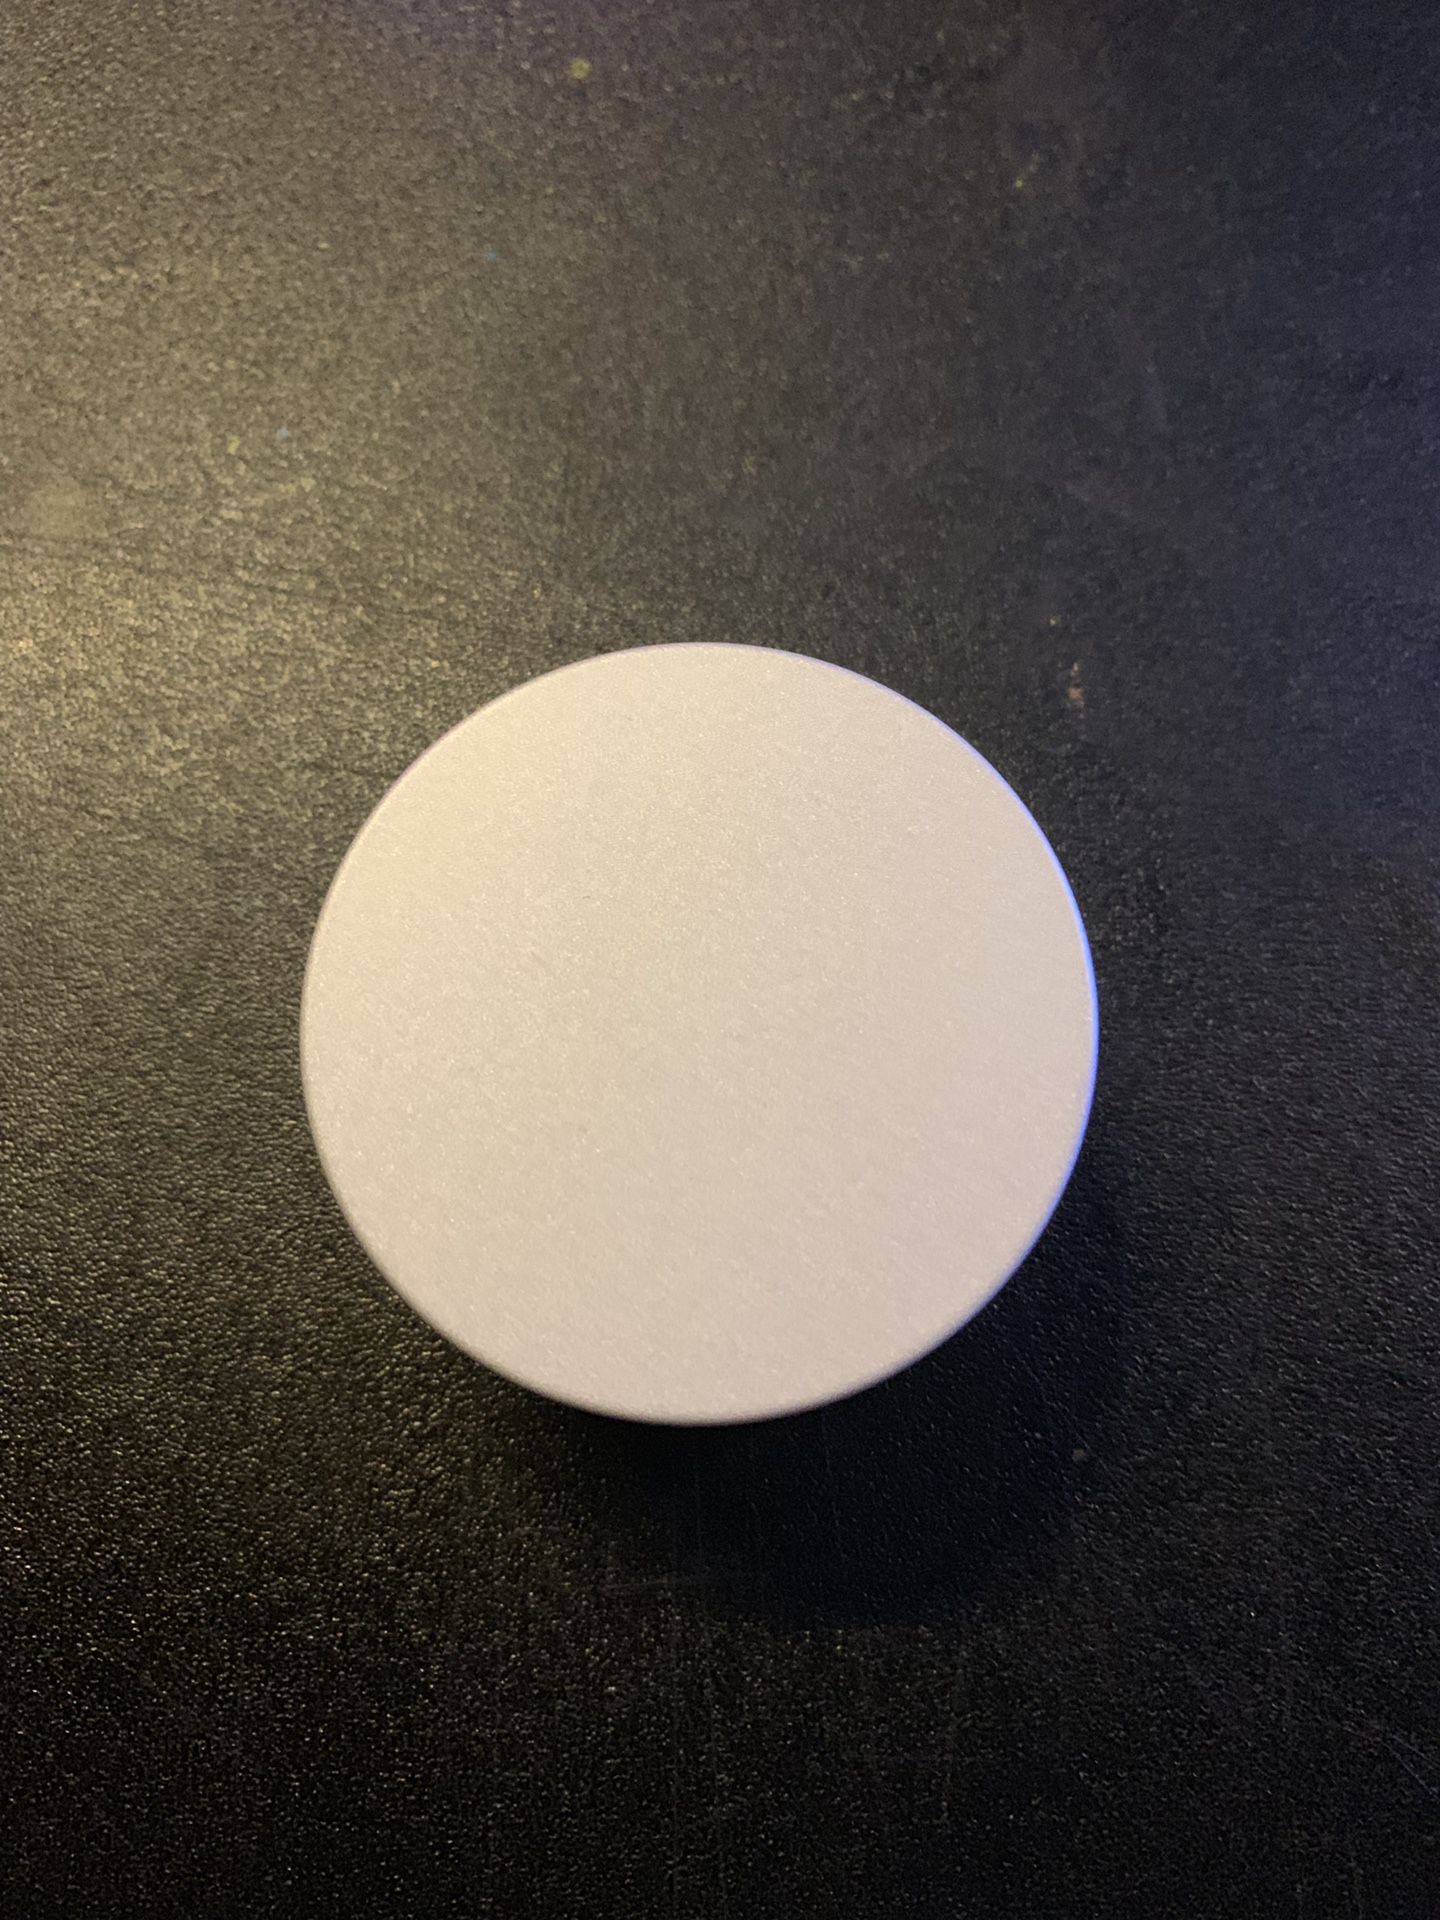 Microsoft Surface dial